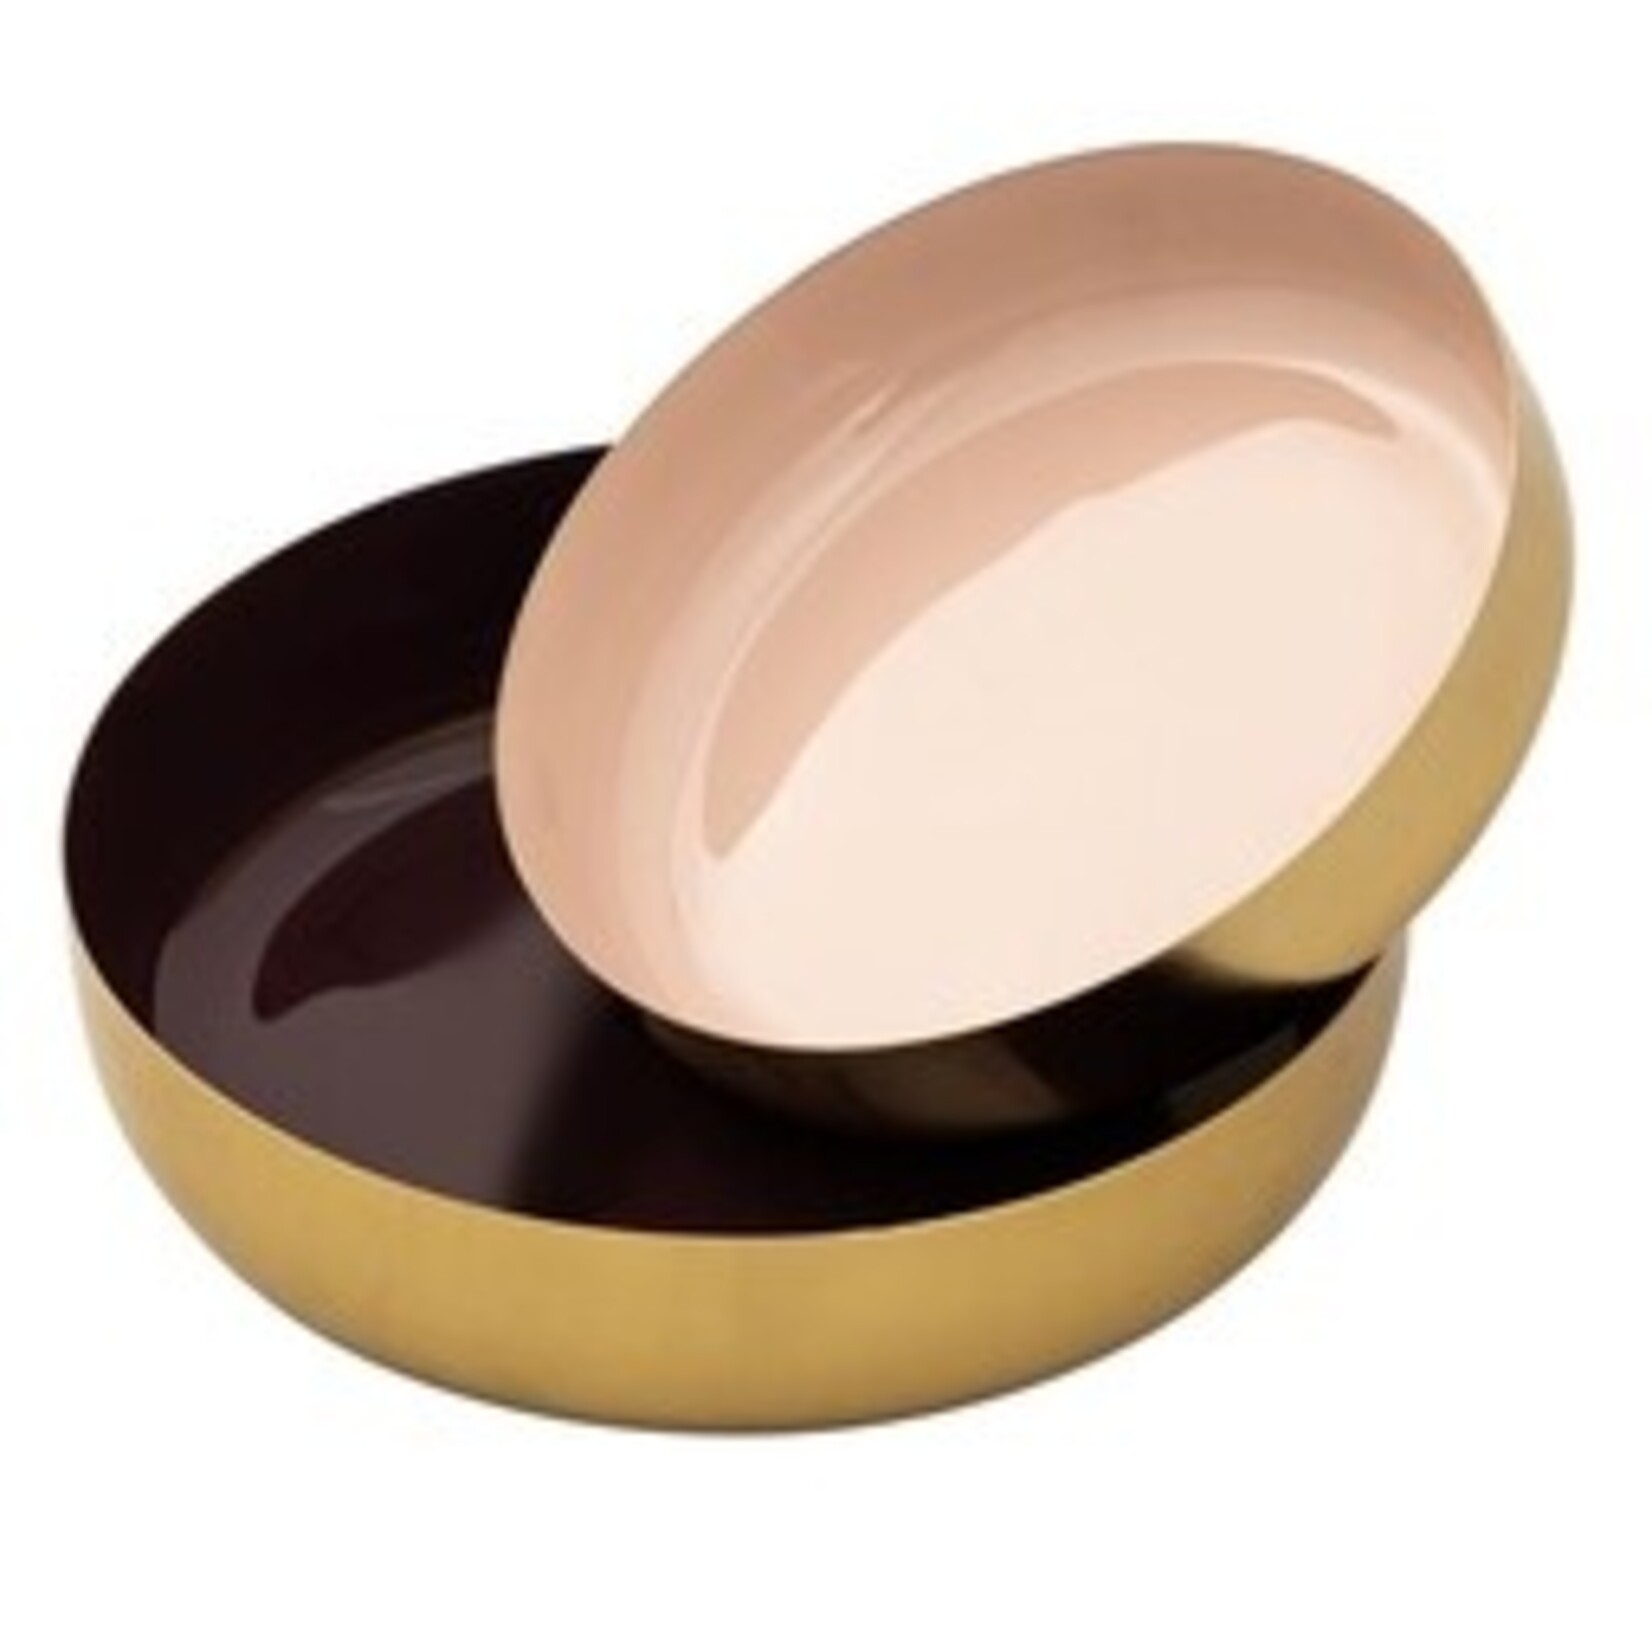 Parya Home - Decorative bowl Set of 2 Round Nibble bowl Glam - ø 22x18 - Gold and inside-enamelled - High-quality metal